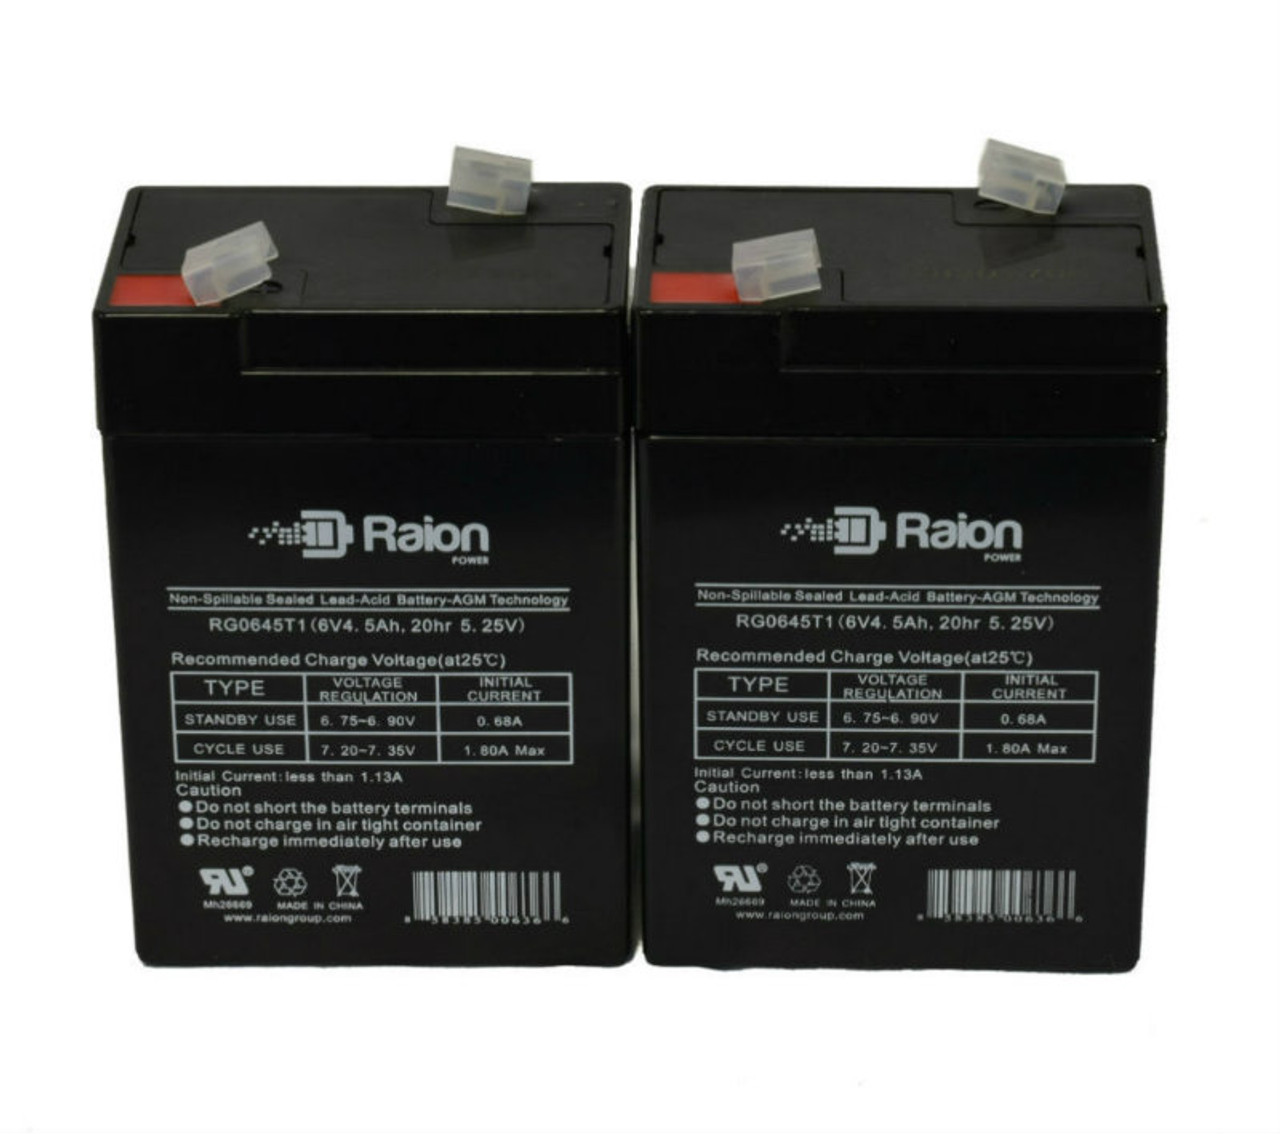 Raion Power 6V 4.5Ah Replacement Emergency Light Battery for Chloride ERS - 2 Pack